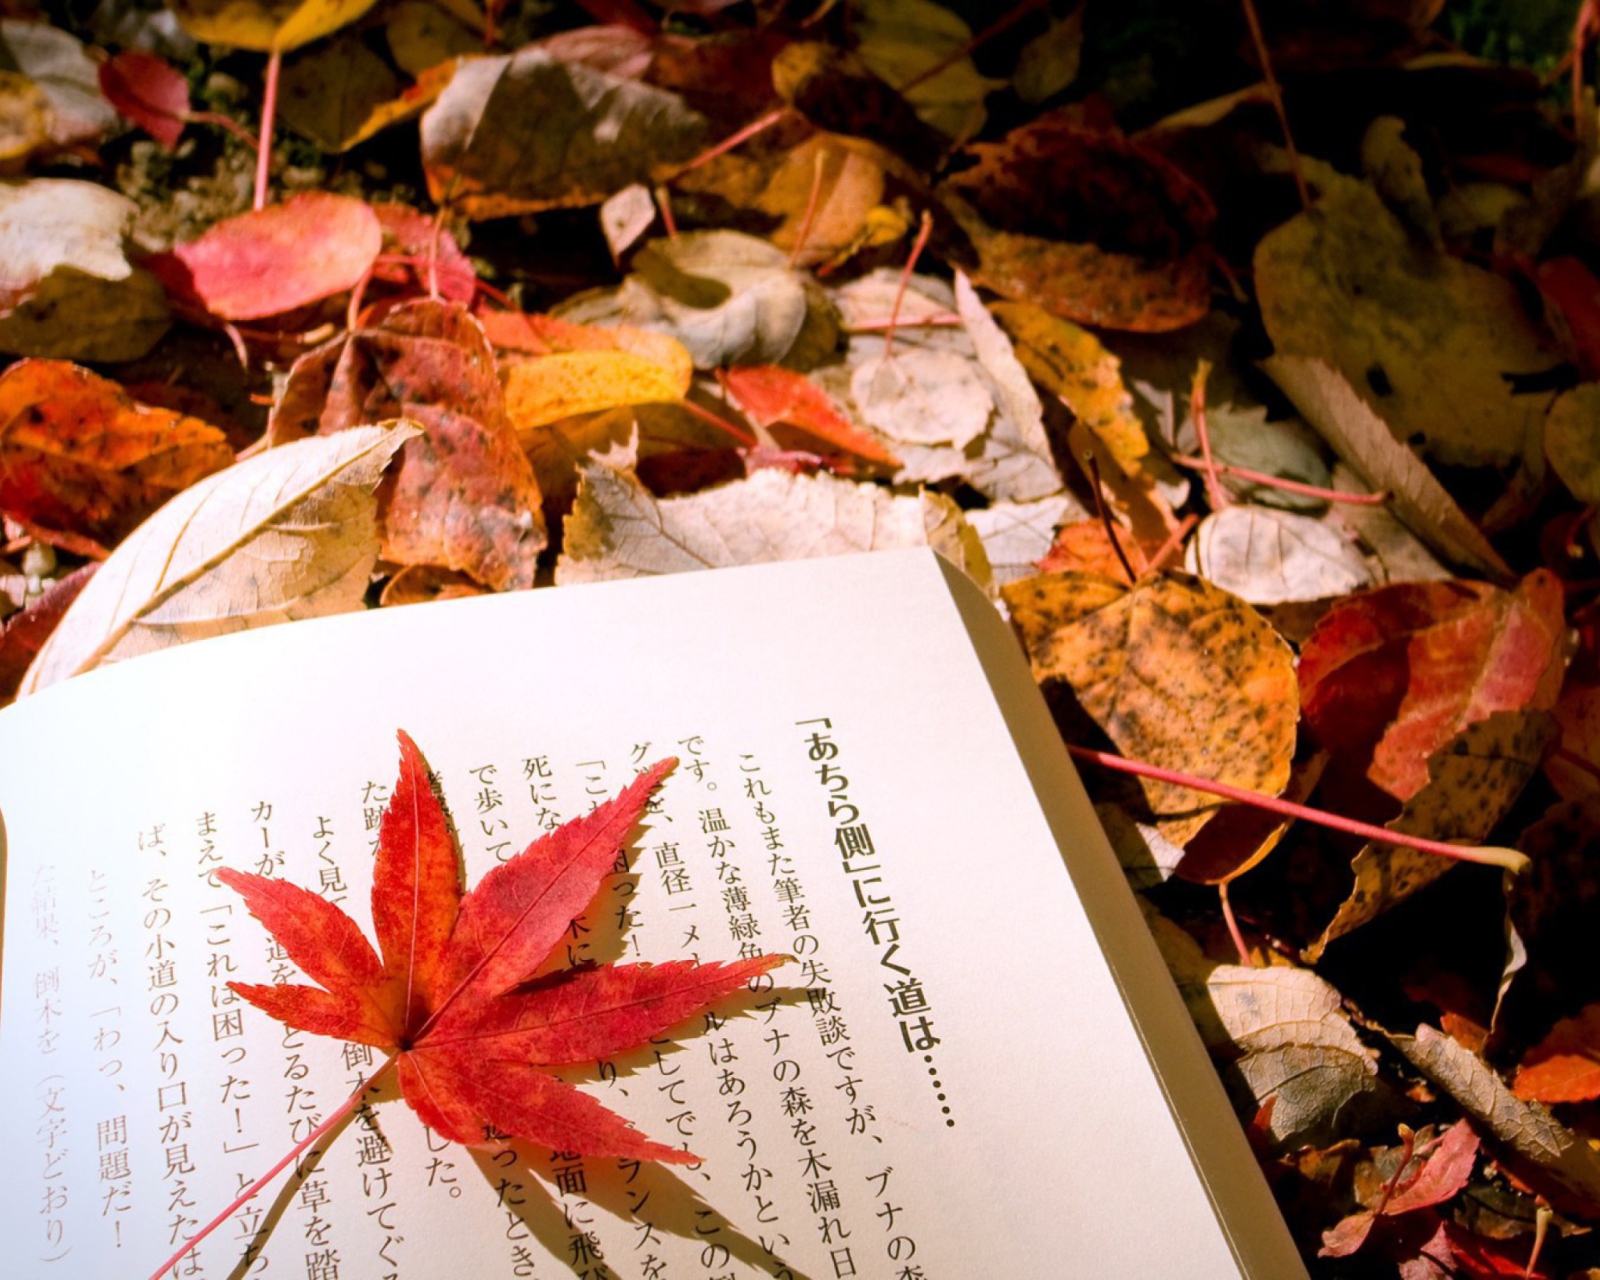 Red Leaf On A Book wallpaper 1600x1280